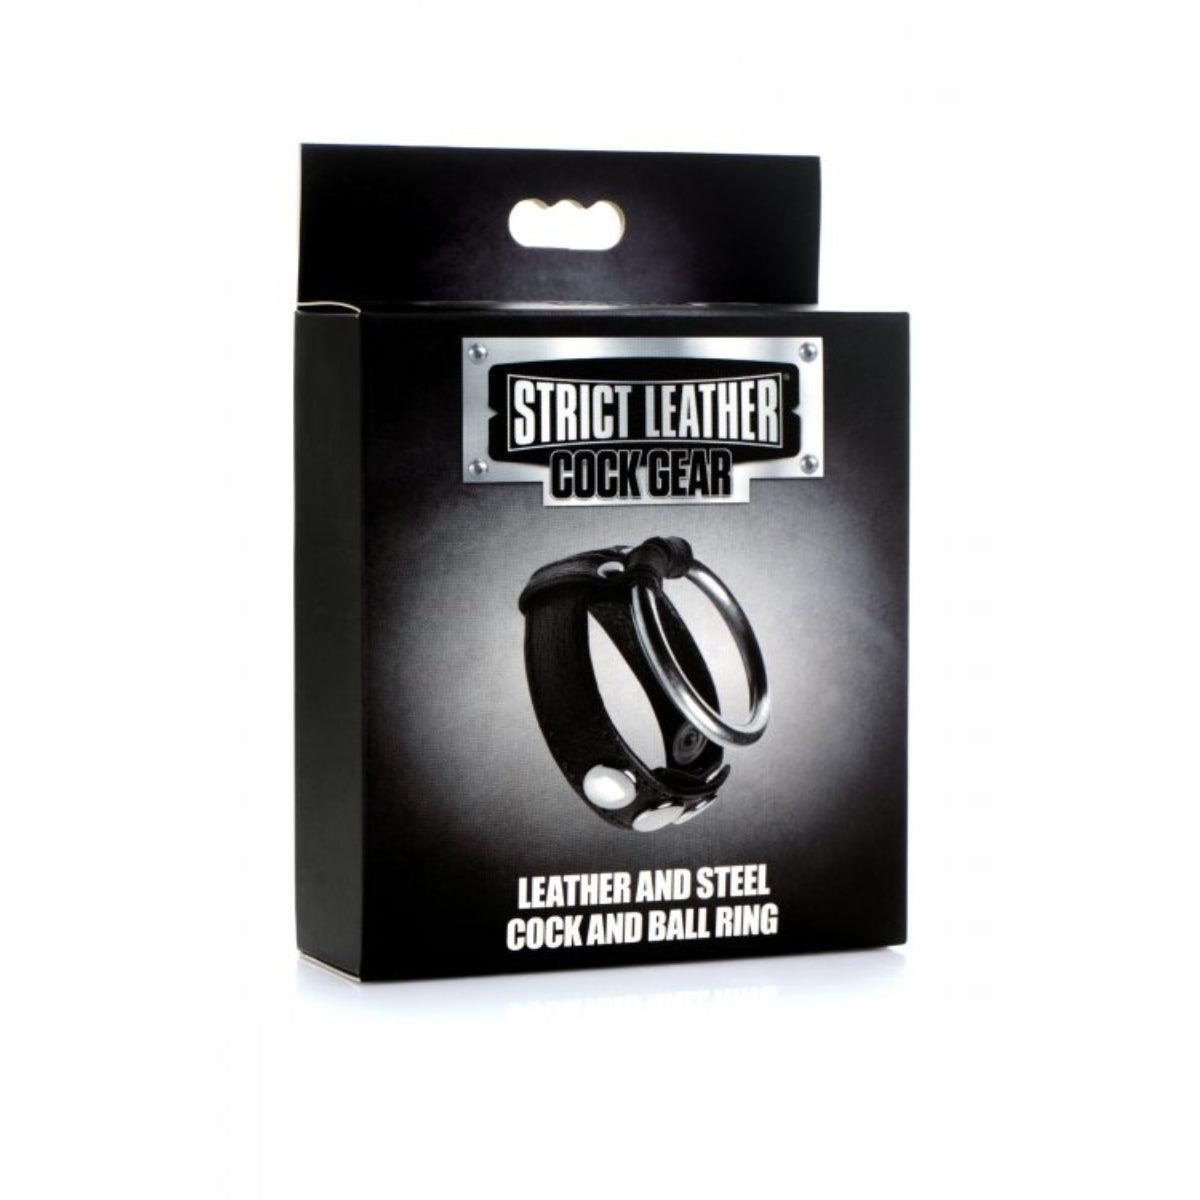 Strict Leather Cock Gear Leather & Steel Cock & Ball Ring